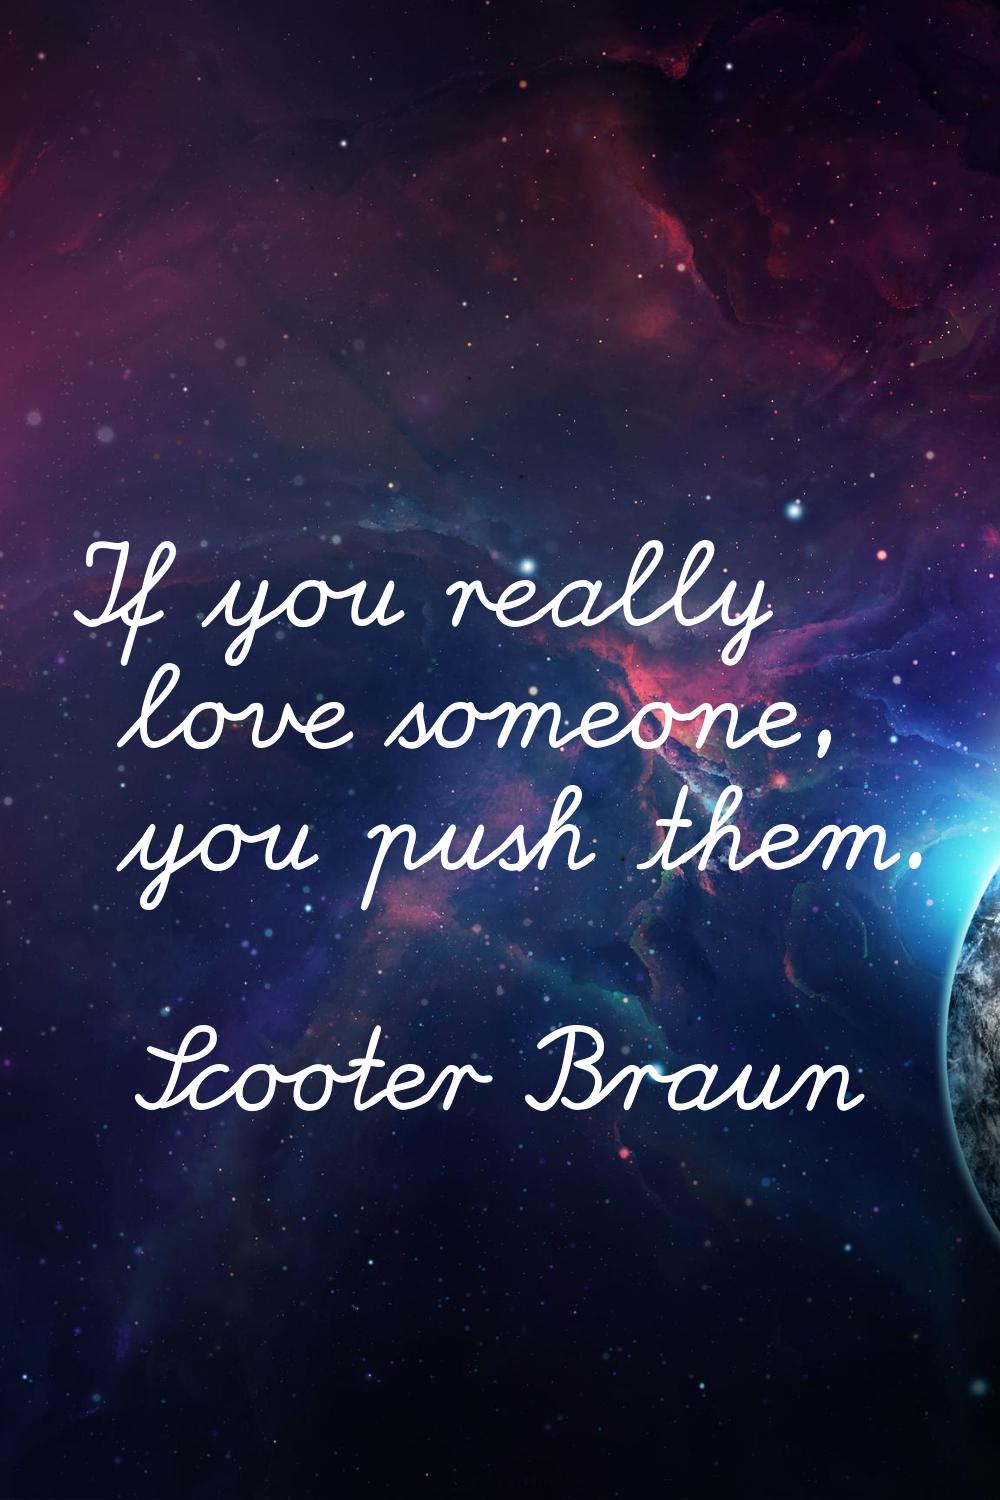 If you really love someone, you push them.